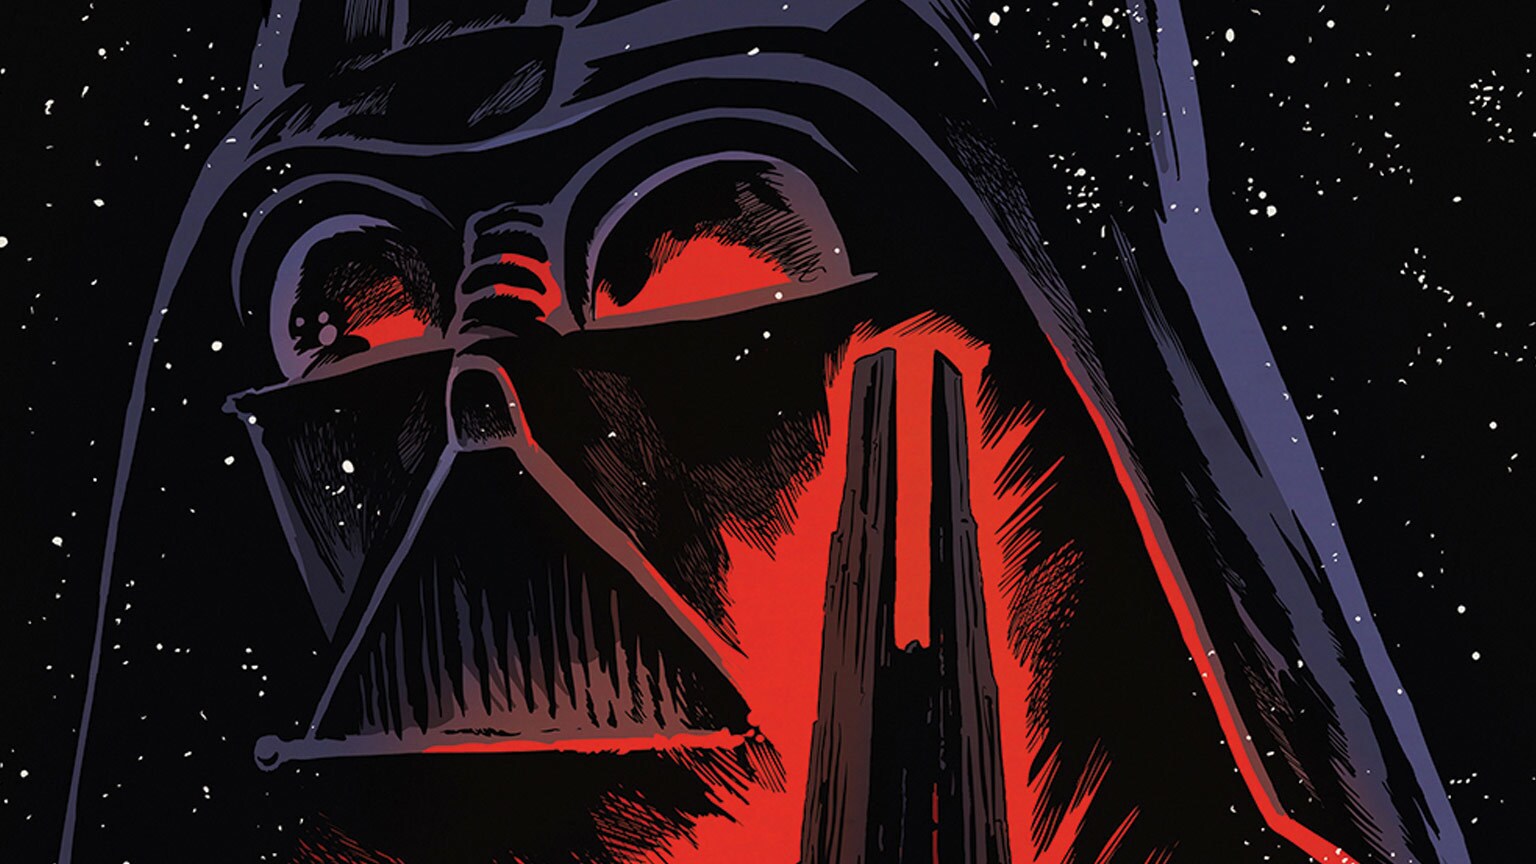 SDCC 2018: IDW's Tales from Vader's Castle to Bring the Galactic Frights This October - Exclusive